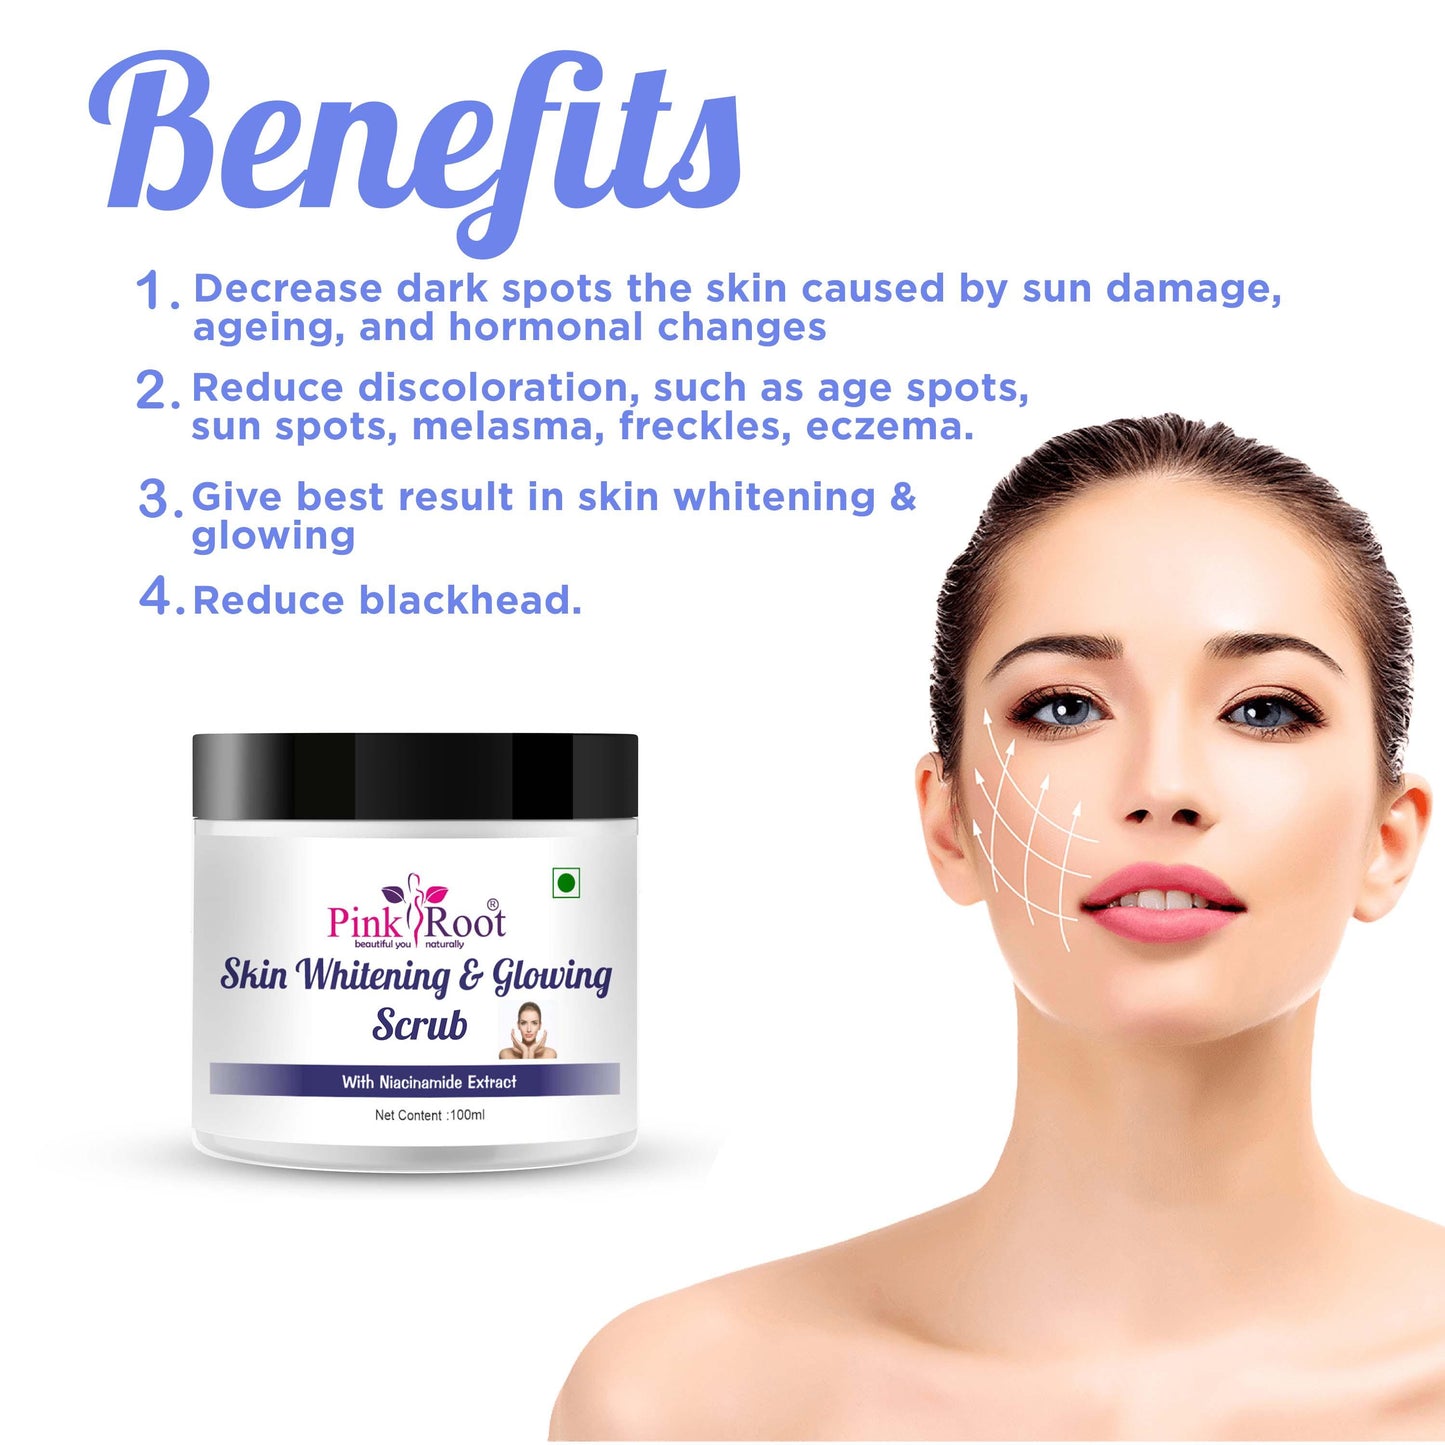 Pink Root Skin Whitening Scrub 100ml, Contains Niacinamide Extract for Instant Skin Whitening, Skin Lightening, Removes Dark Spot, Reduces Pigmentation - Pink Root